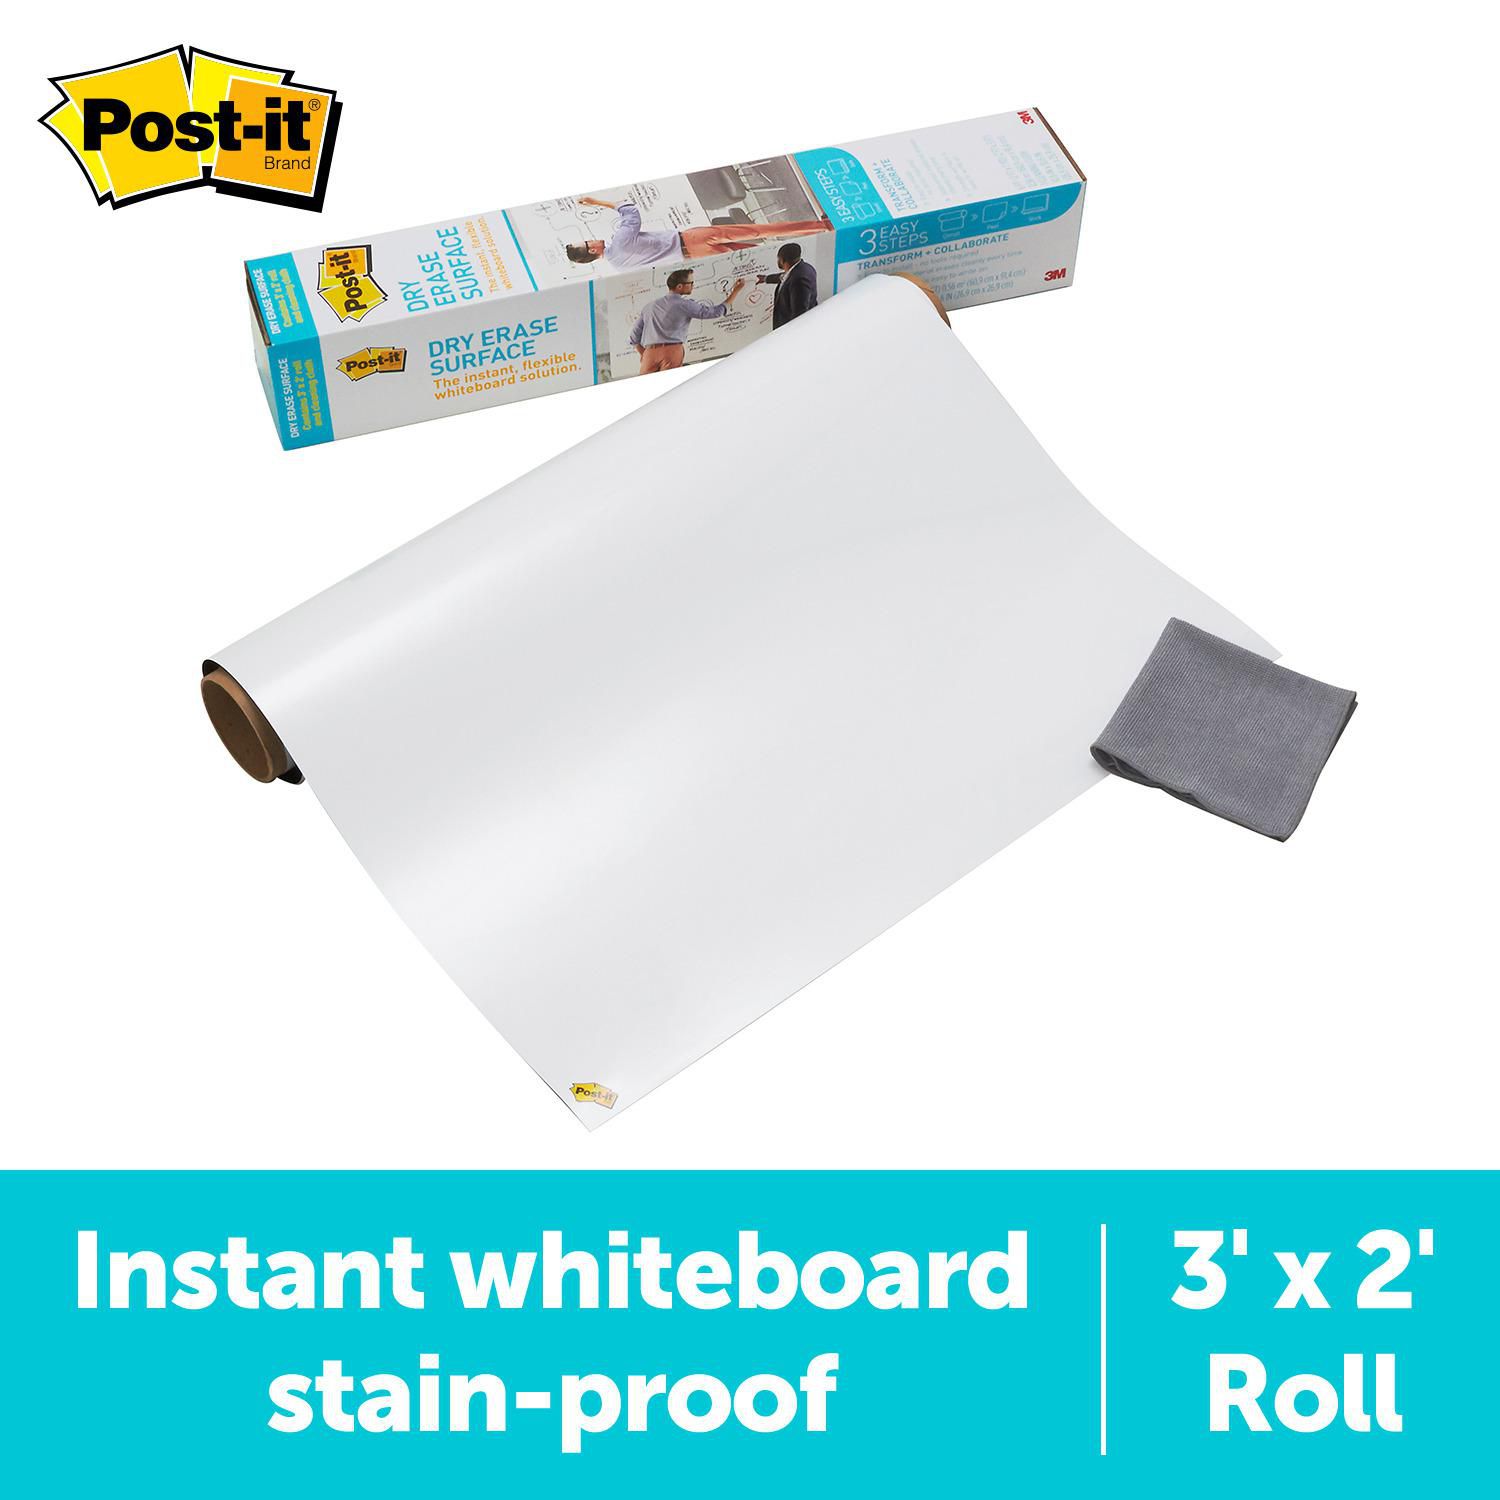 Post-it Dry Erase Whiteboard Film Surface for Walls, Doors, Tables,  Chalkboards, Whiteboards, and More, Removable, Stain-Proof, Easy  Installation, 3